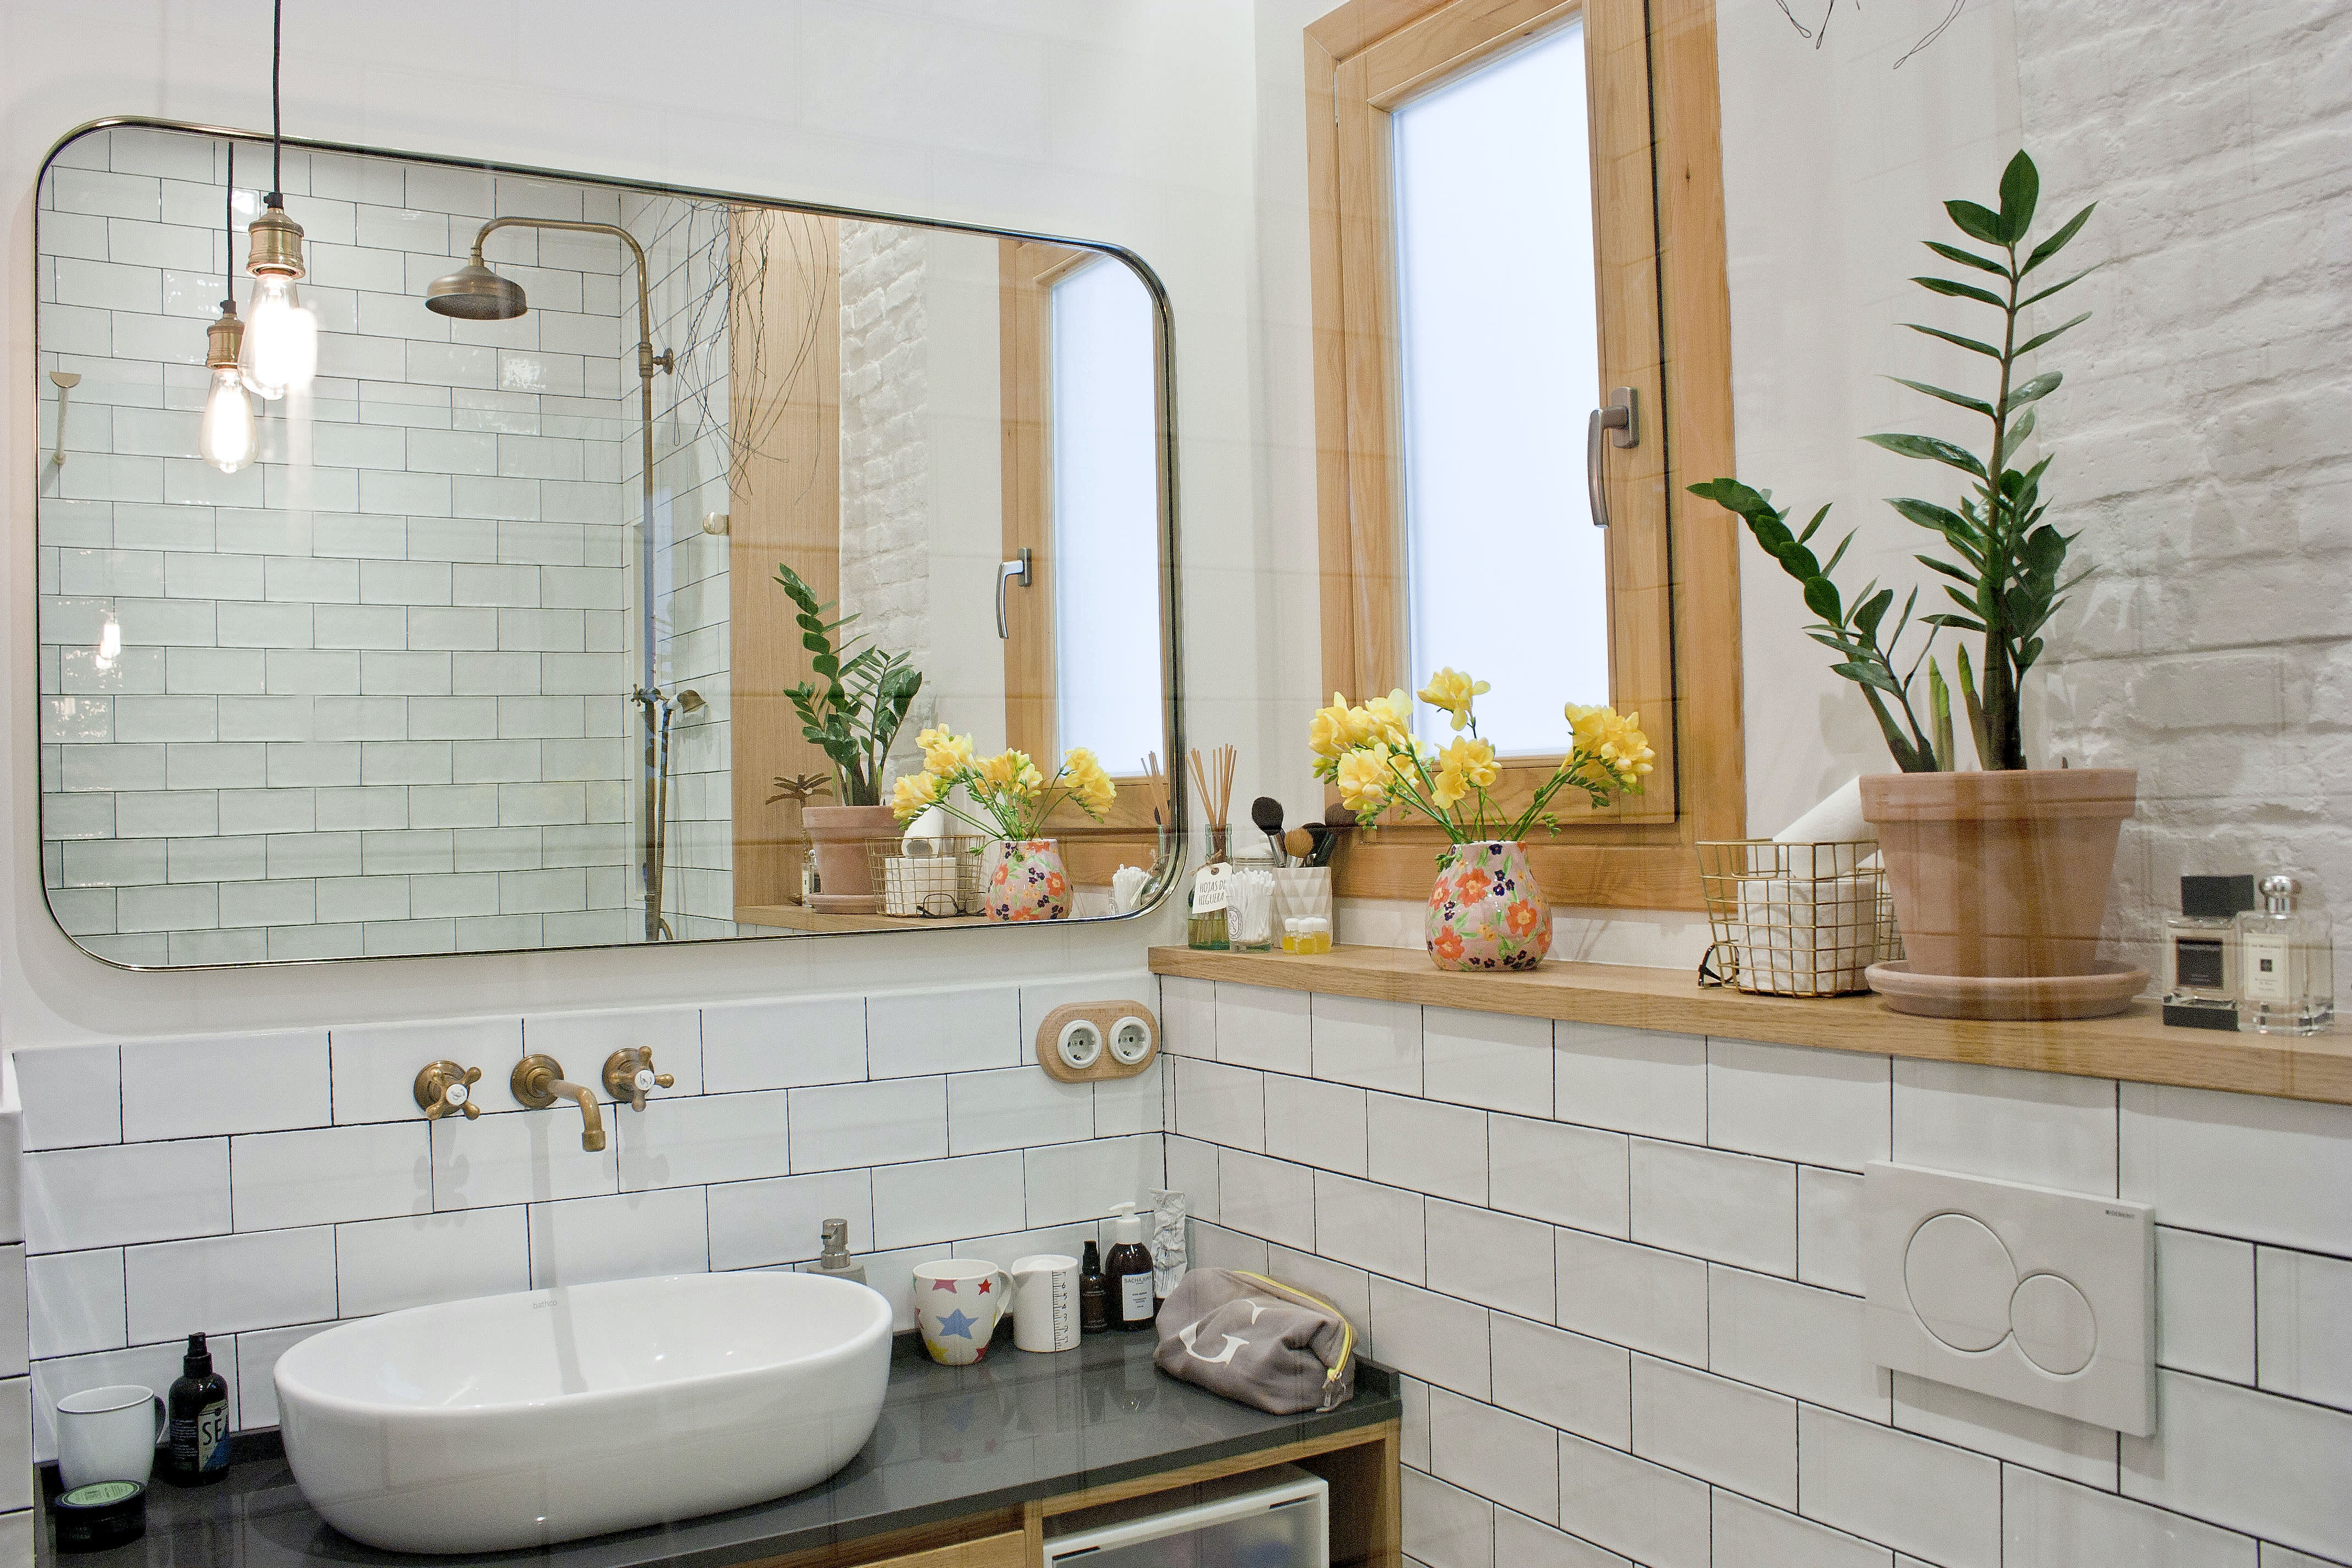 How to Decorate Your Bathroom | Apartment Therapy